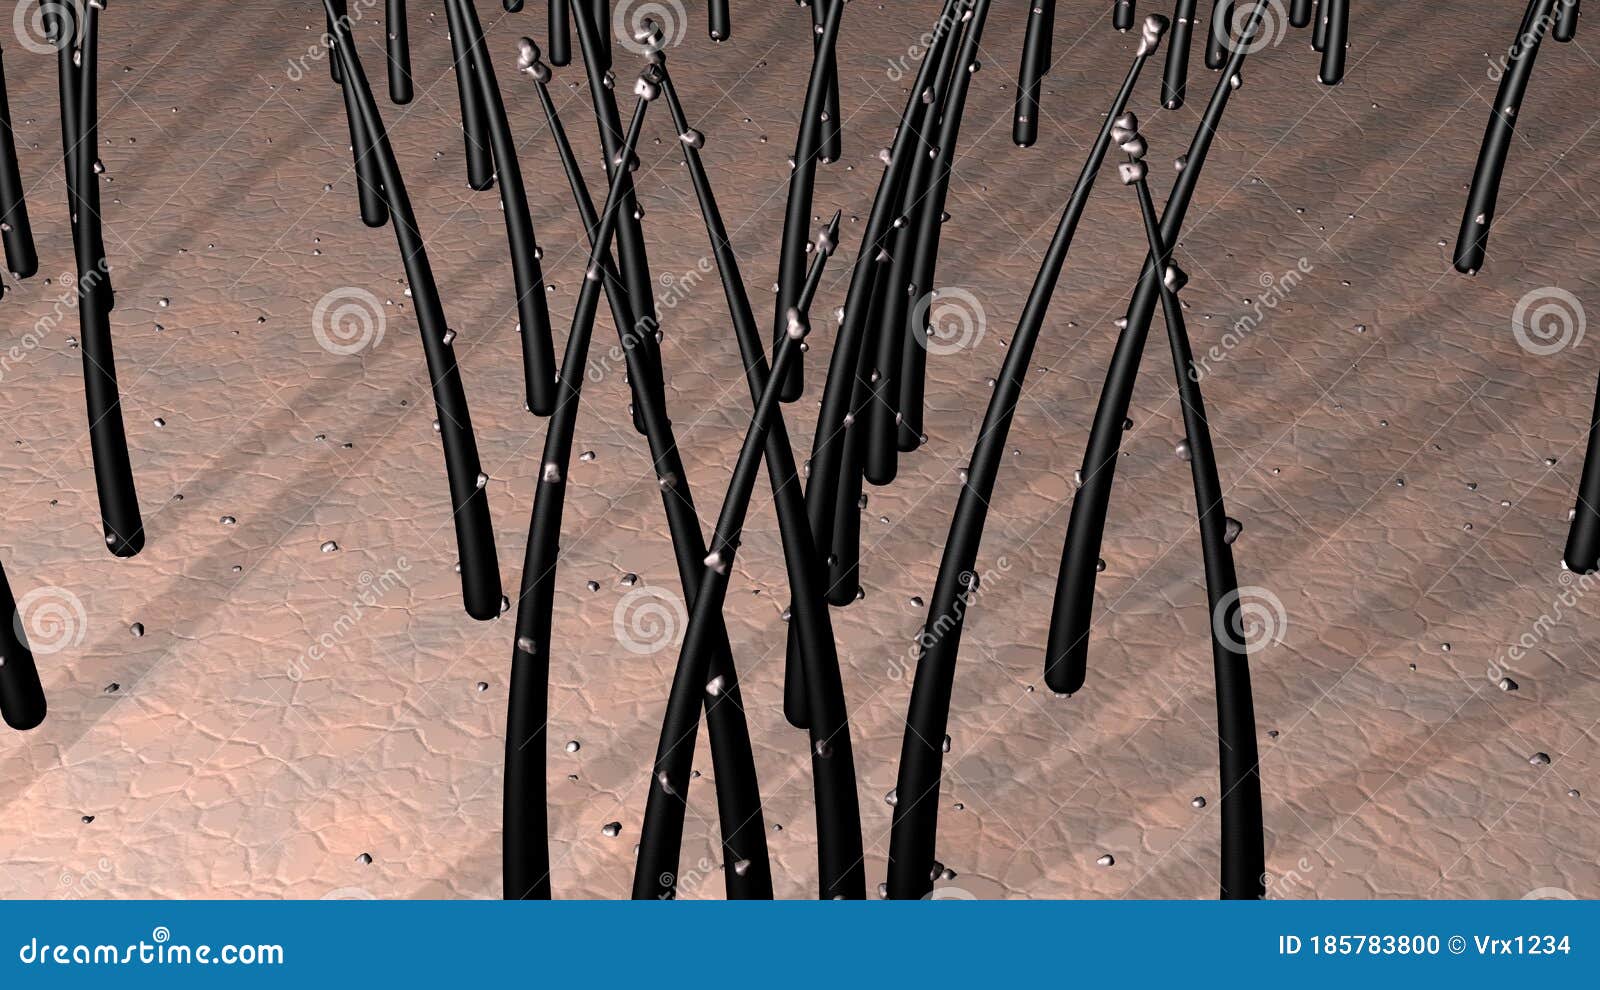 Hair on Skin, Scalp Covered with Dirt Particles, Dandruff, Debris. Close Up  Magnification. View 4. 3d Rendering Illustration Stock Illustration -  Illustration of dandruff, damaged: 185783800